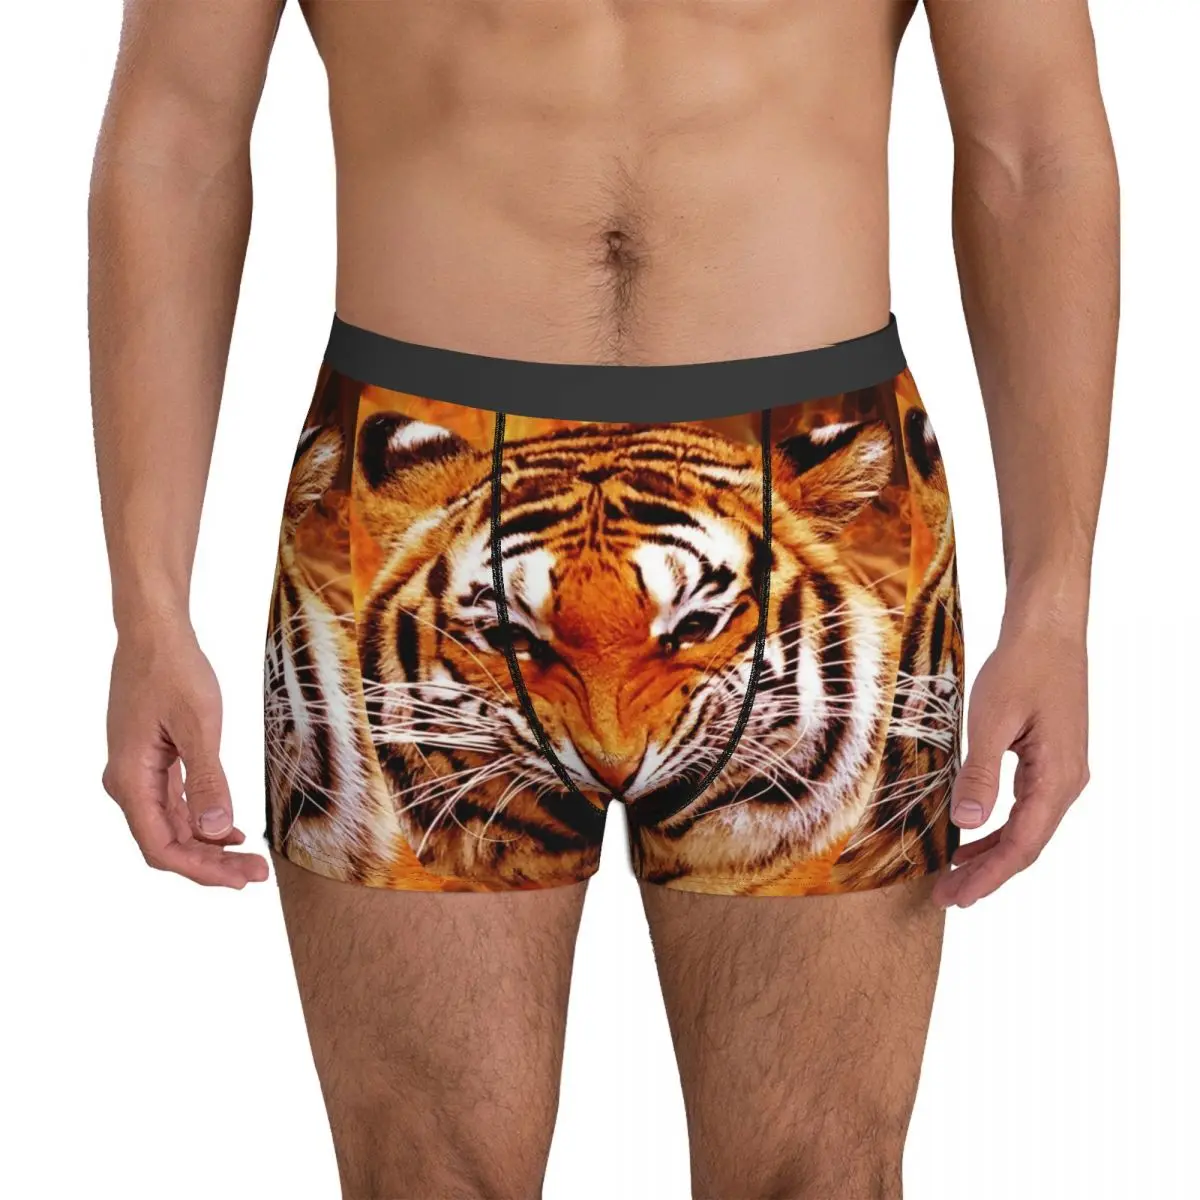 

Tiger And Flame Underwear Animal Print Printed Boxer Shorts Trenky Males Panties Plain Boxer Brief Gift Idea